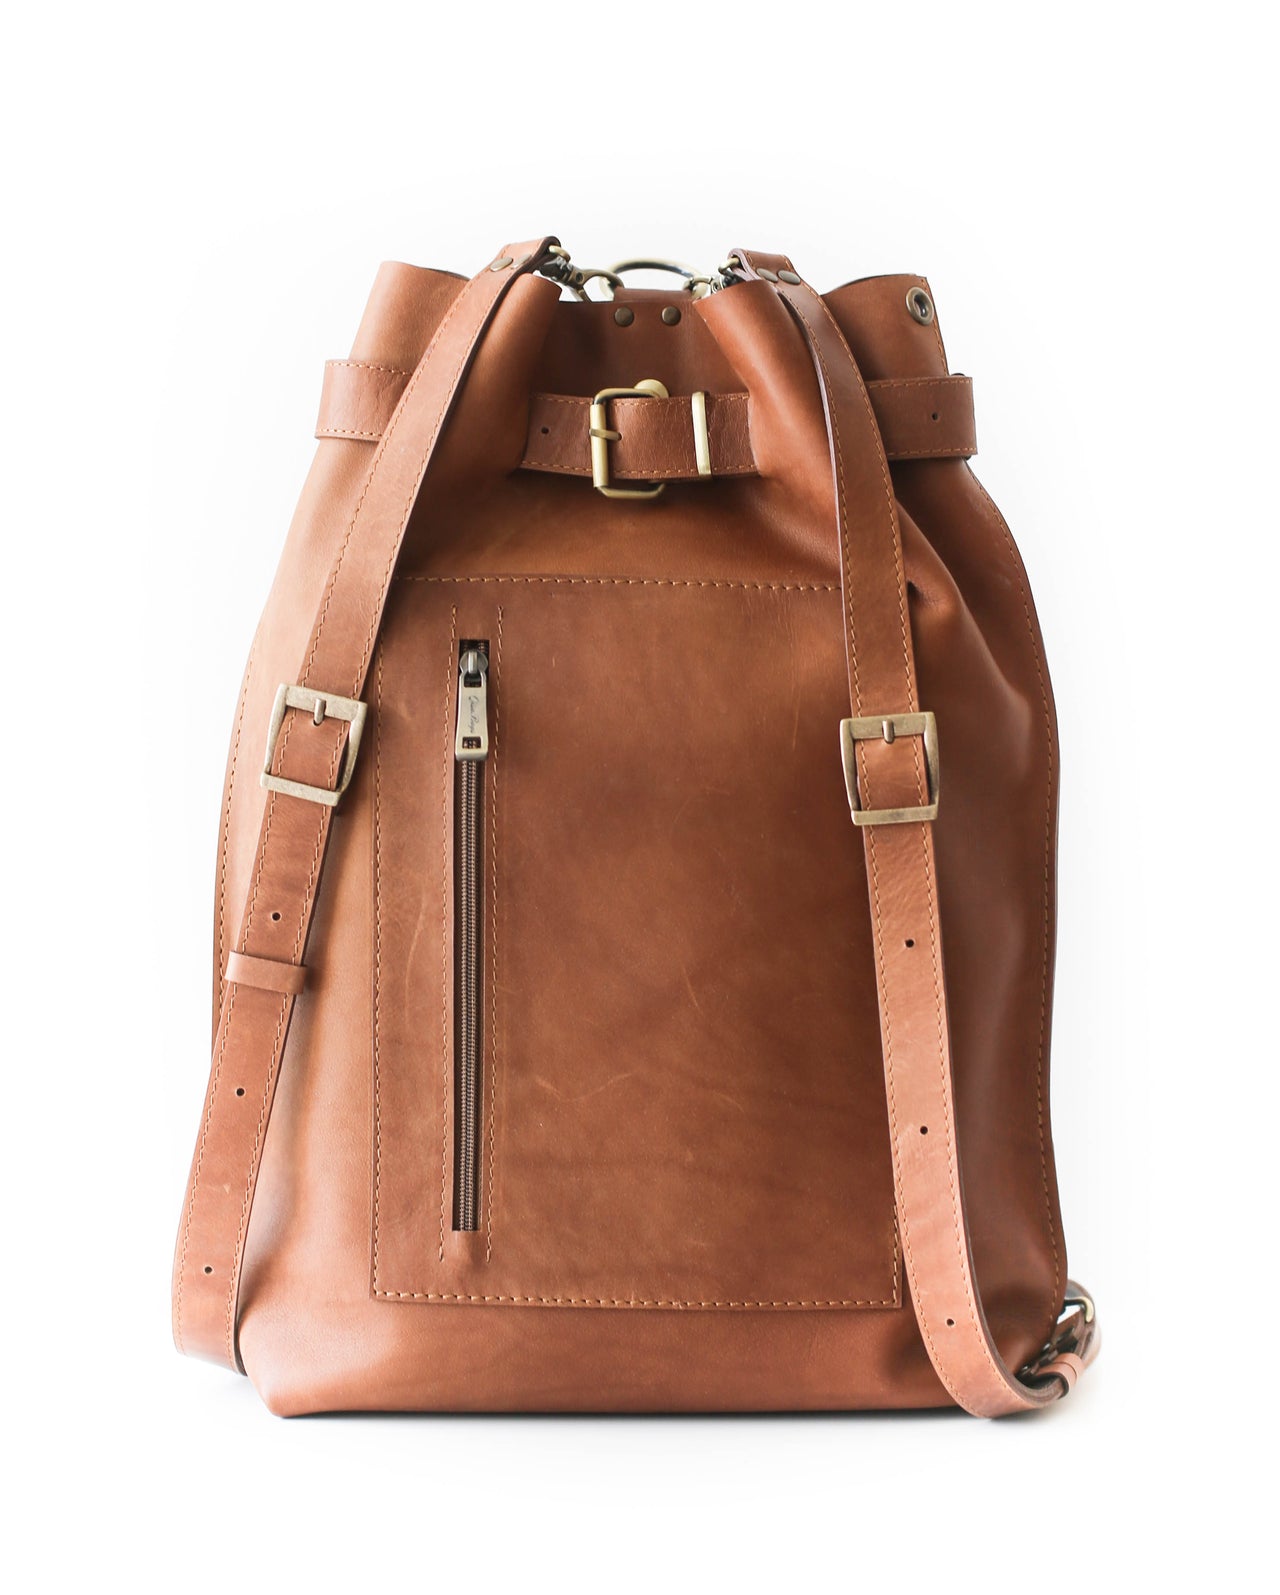 Brown Large Leather Backpack purse